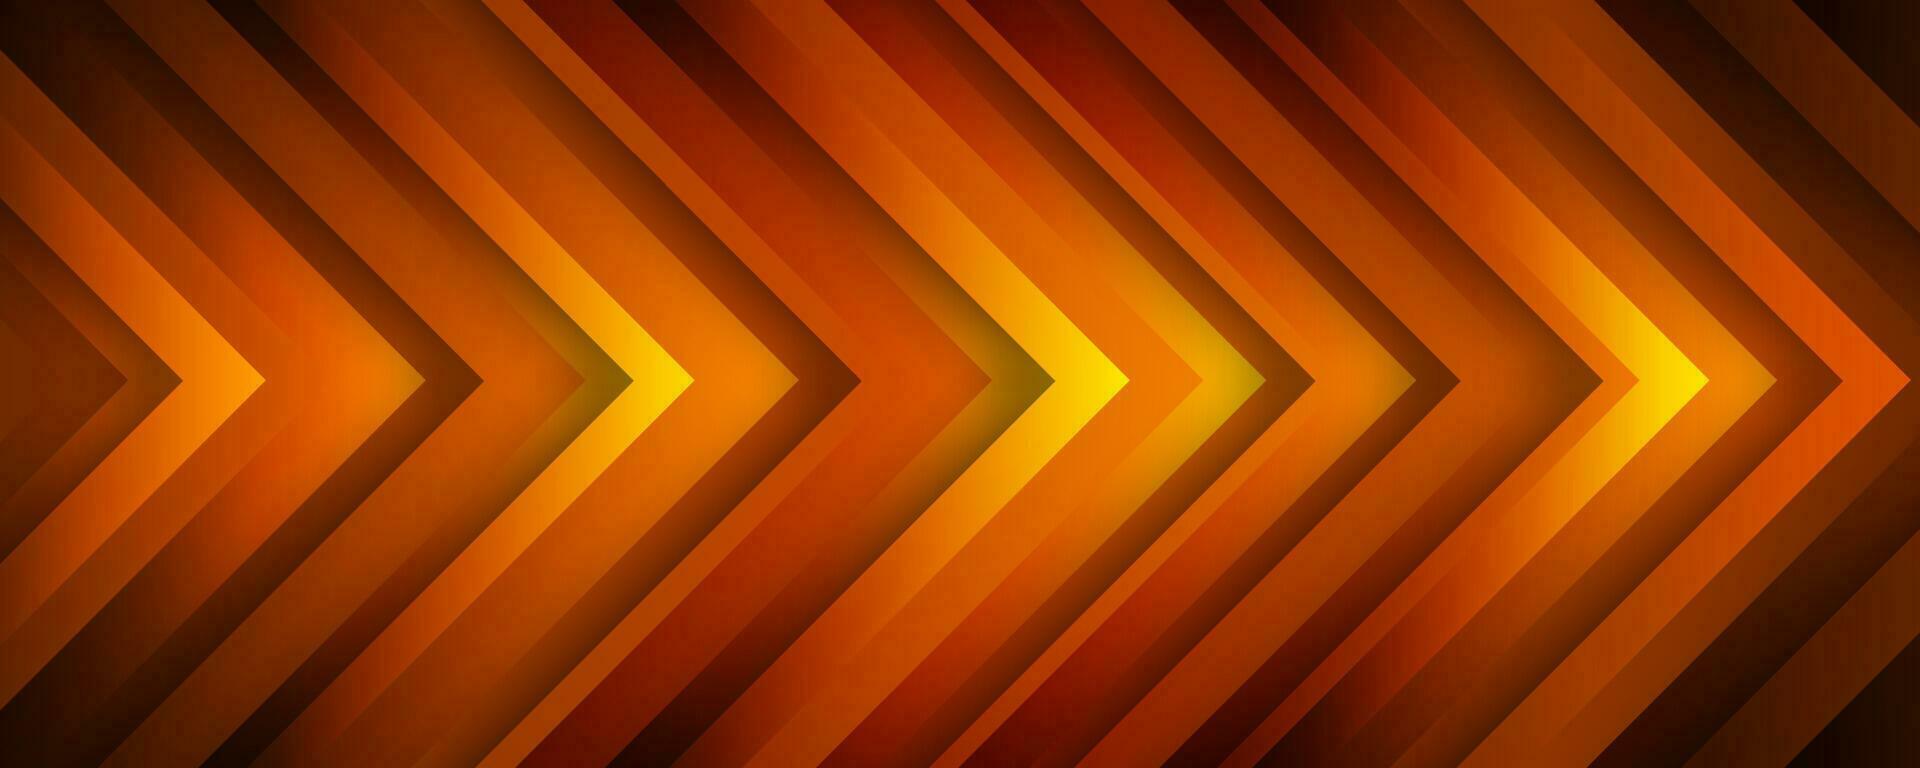 3D orange techno abstract background overlap layer on dark space with glowing arrows effect decoration. Modern graphic design element speed style concept for banner, flyer, card, or brochure cover vector